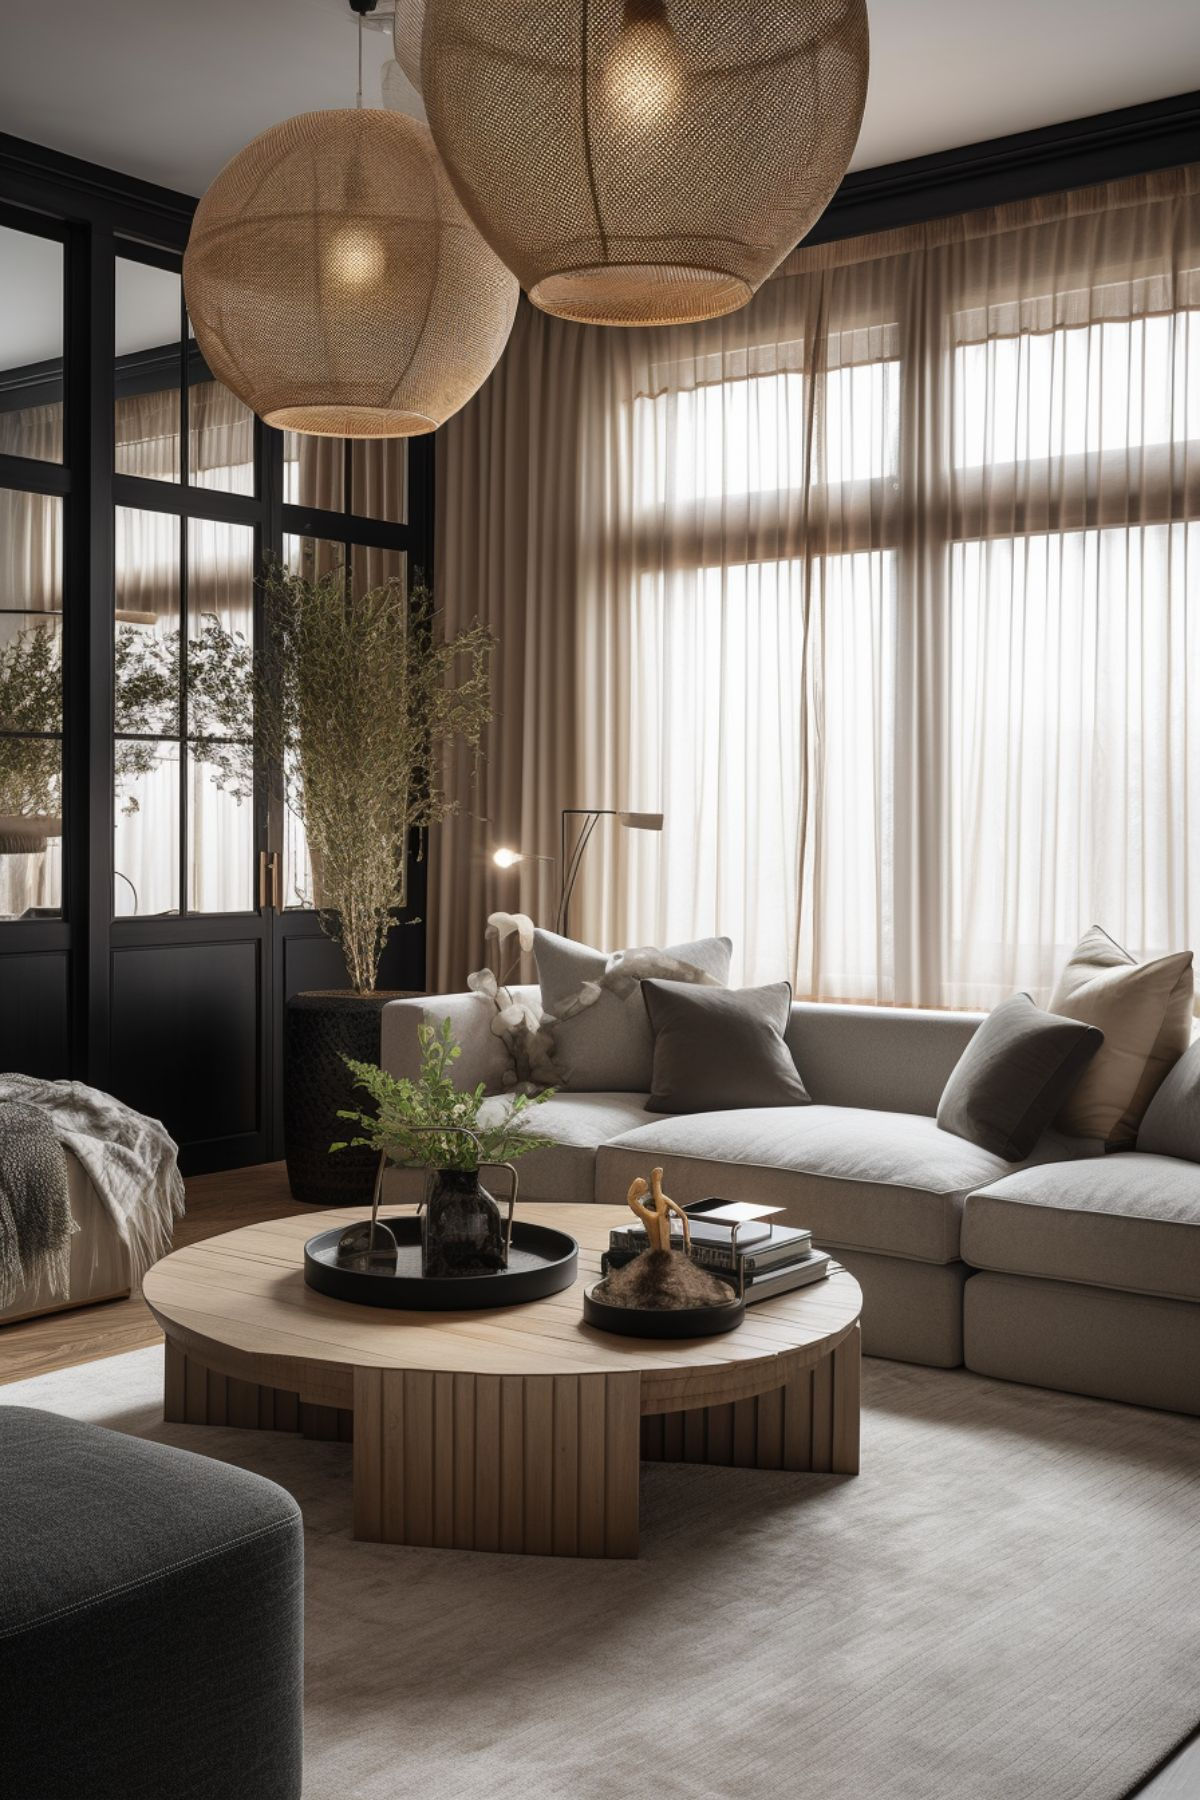 A Guide to Choosing Modern Sheer Curtains
for Your Home